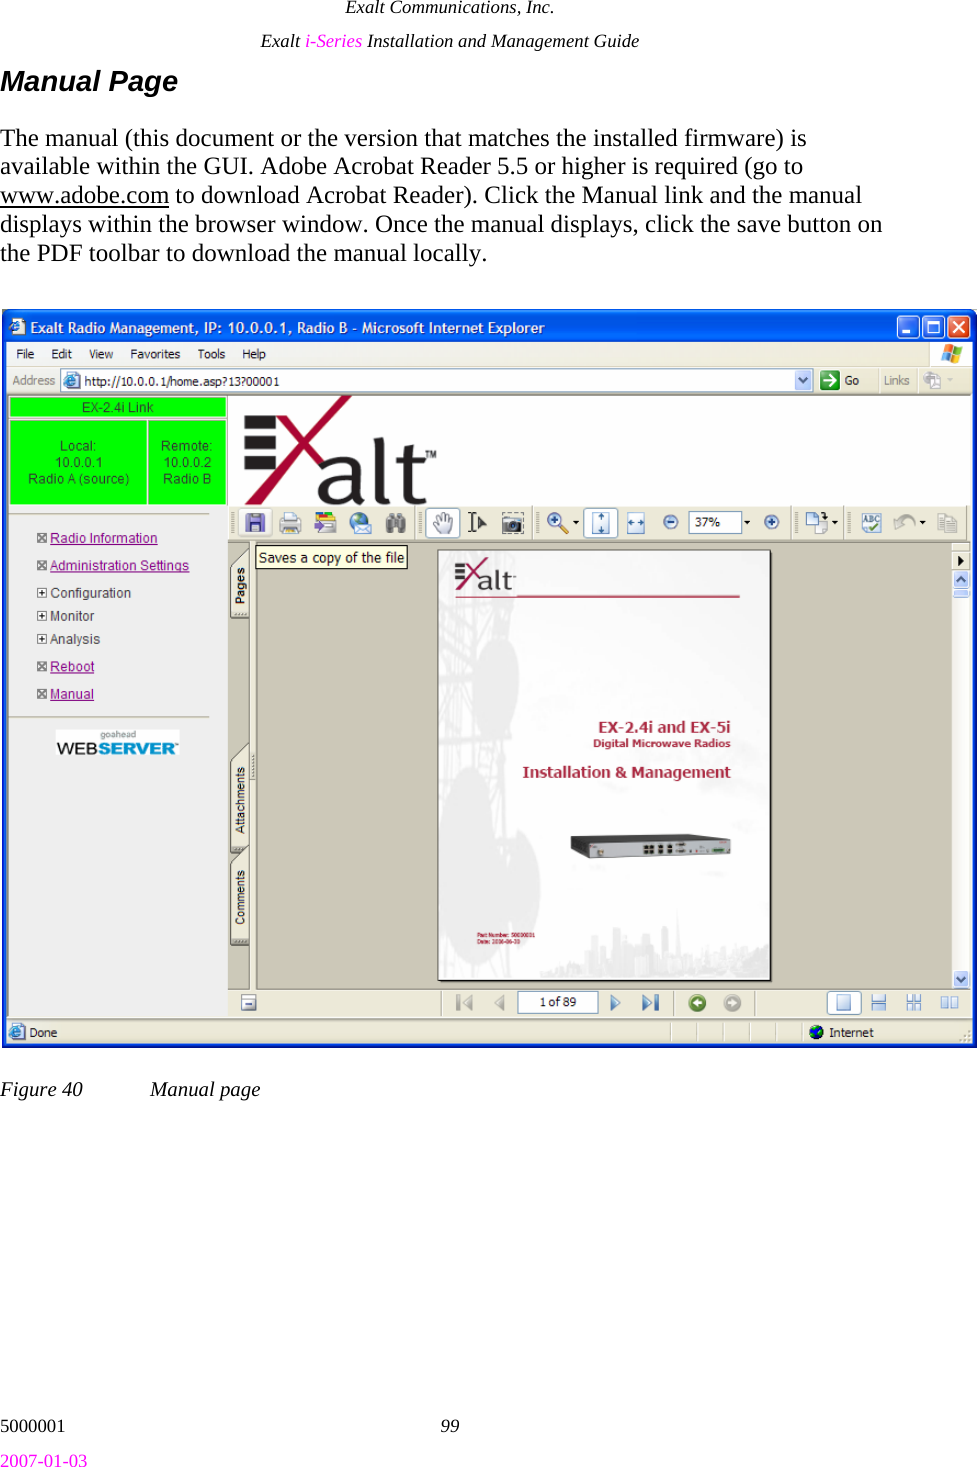 Exalt Communications, Inc. Exalt i-Series Installation and Management Guide 5000001  99 2007-01-03 Manual Page The manual (this document or the version that matches the installed firmware) is available within the GUI. Adobe Acrobat Reader 5.5 or higher is required (go to www.adobe.com to download Acrobat Reader). Click the Manual link and the manual displays within the browser window. Once the manual displays, click the save button on the PDF toolbar to download the manual locally. Figure 40  Manual page 